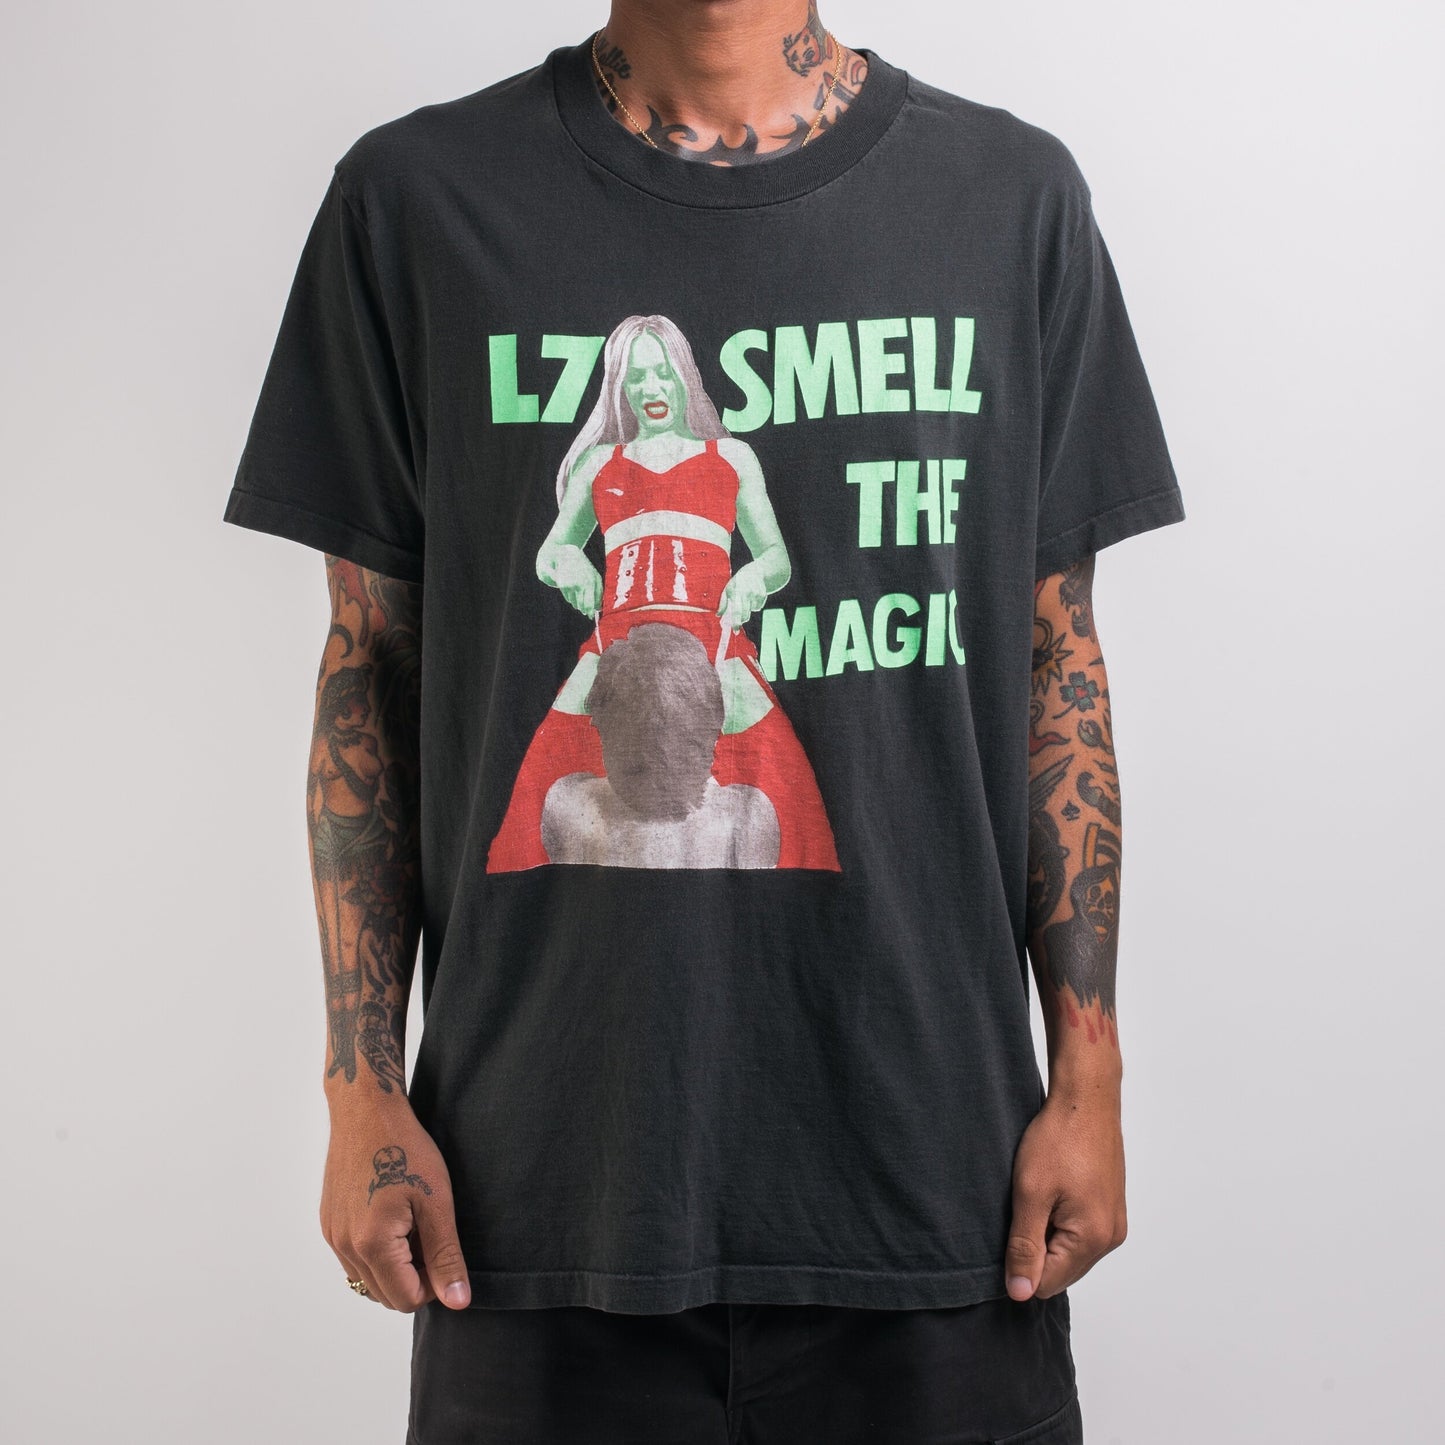 Vintage 90’s L7 Smell The Magic T-Shirt